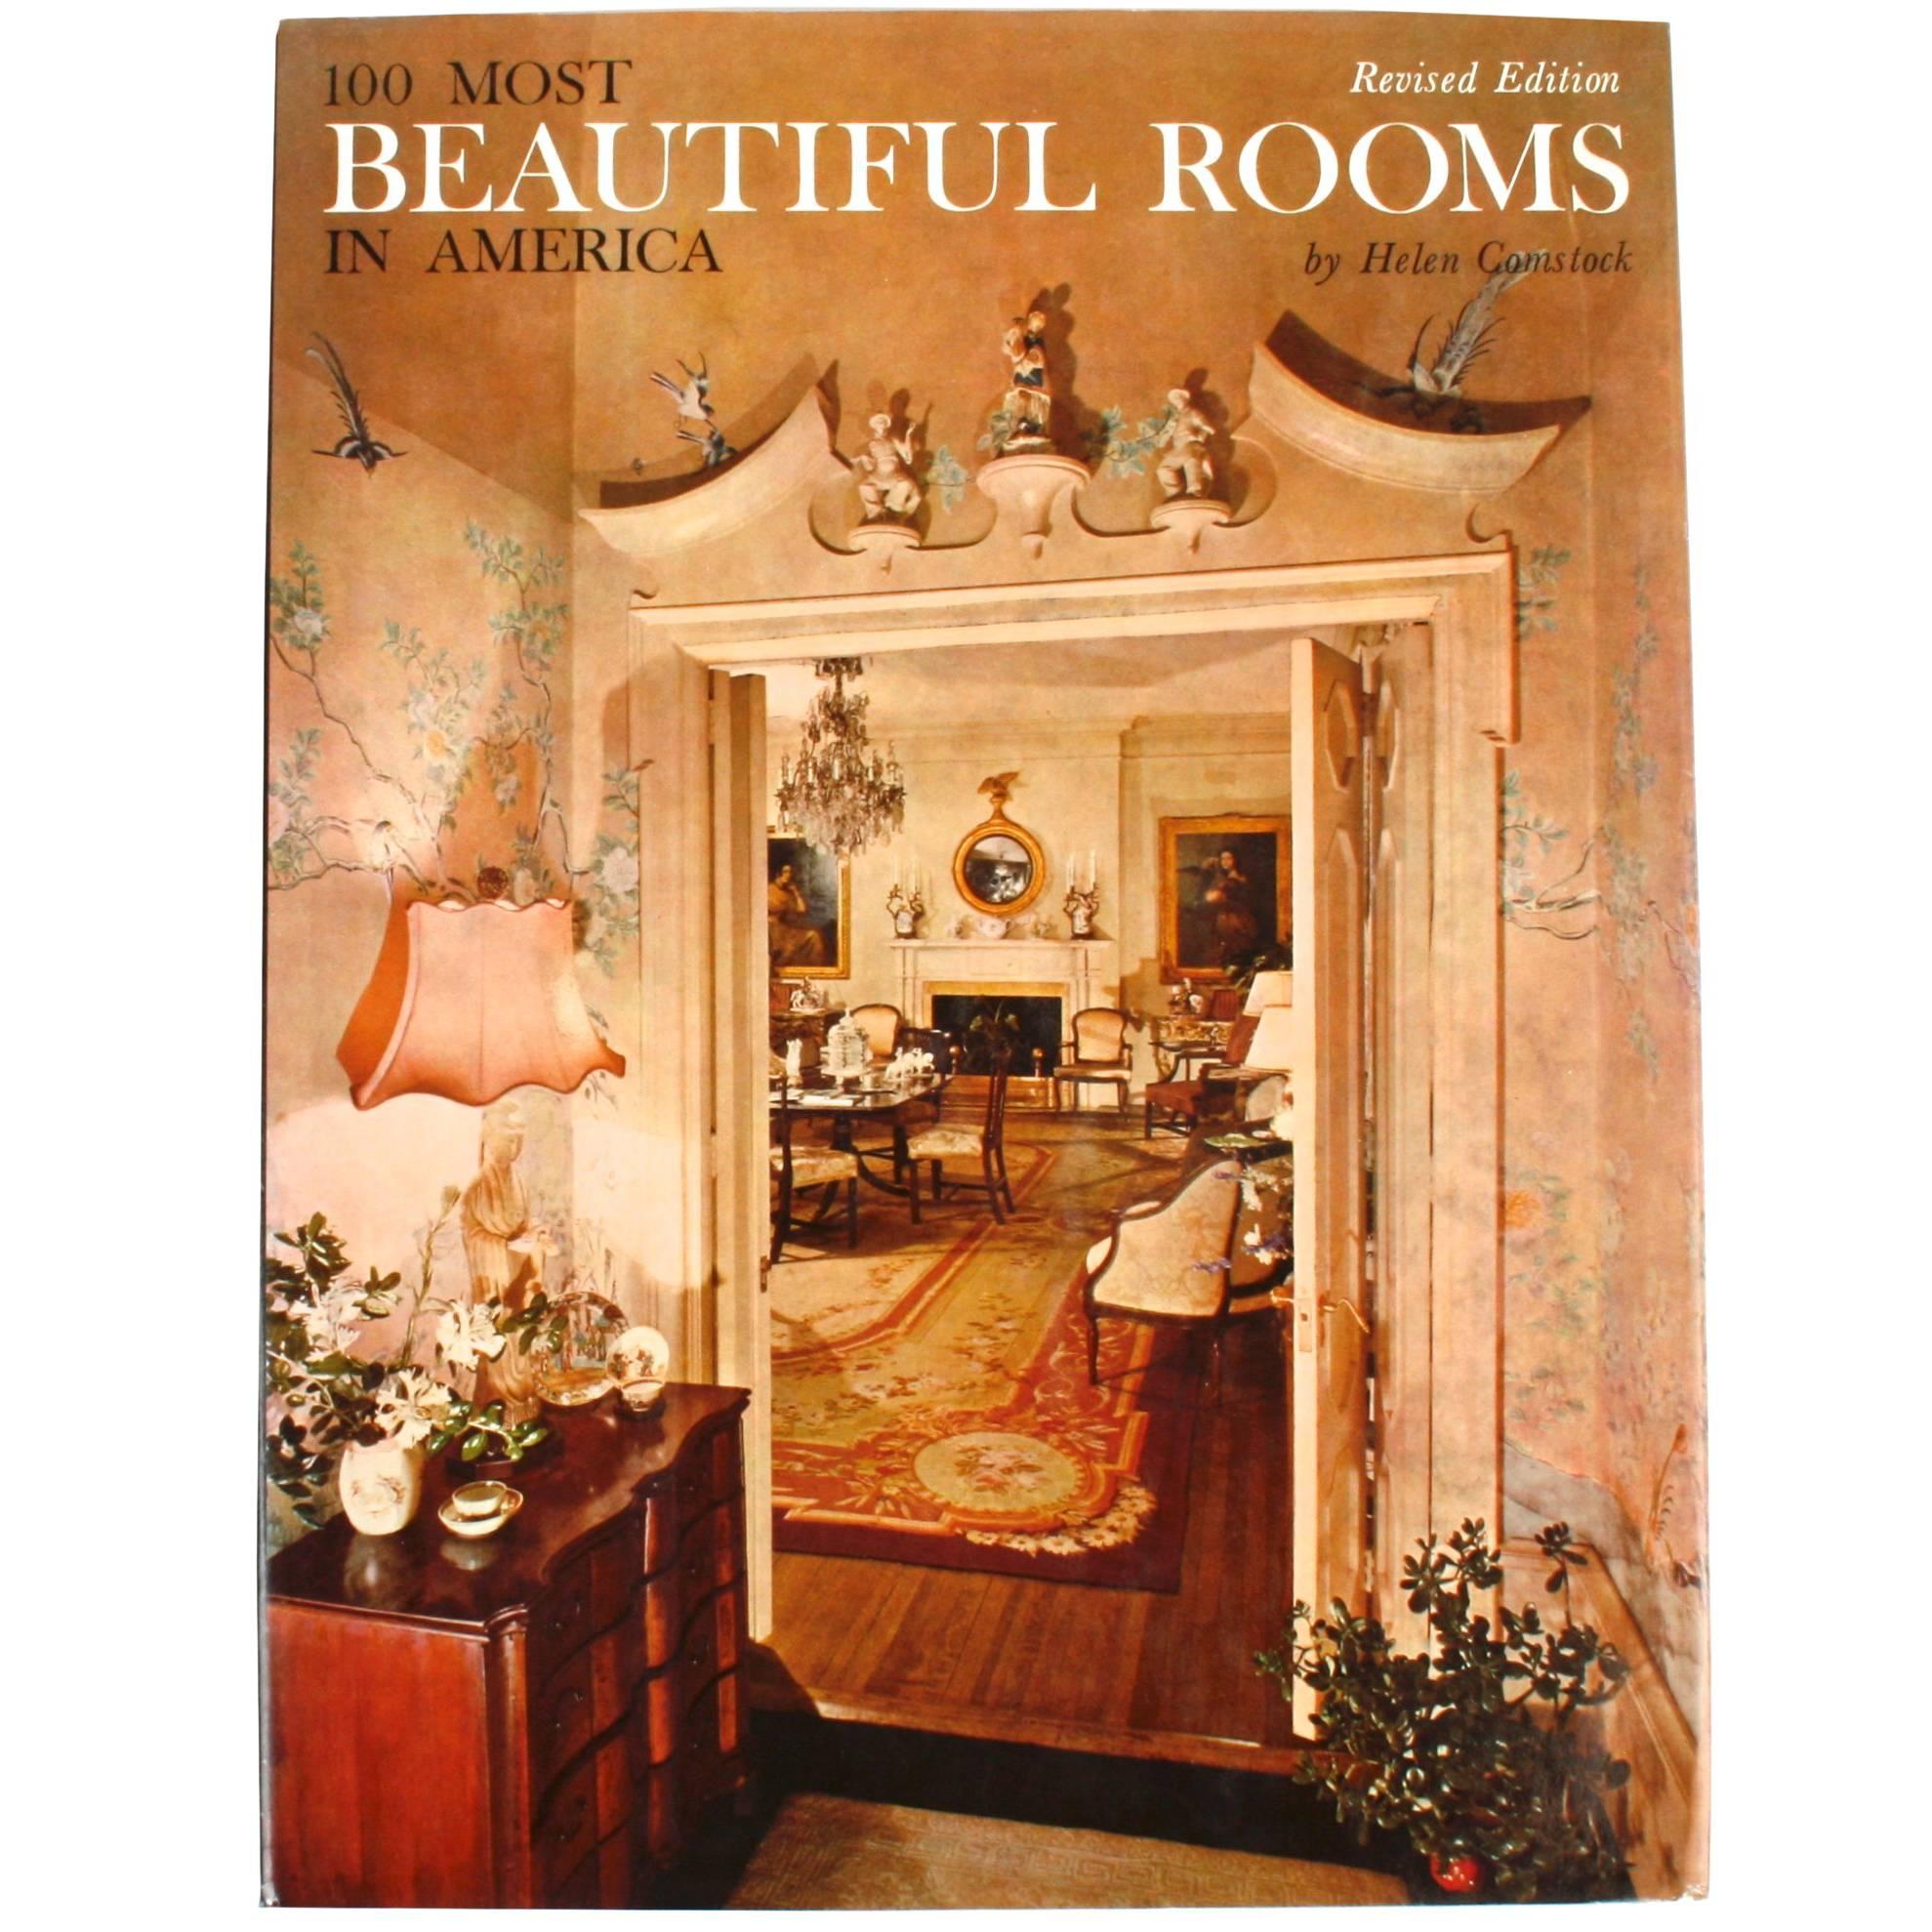 "100 Most Beautiful Rooms in America" Book by Helen Comstock